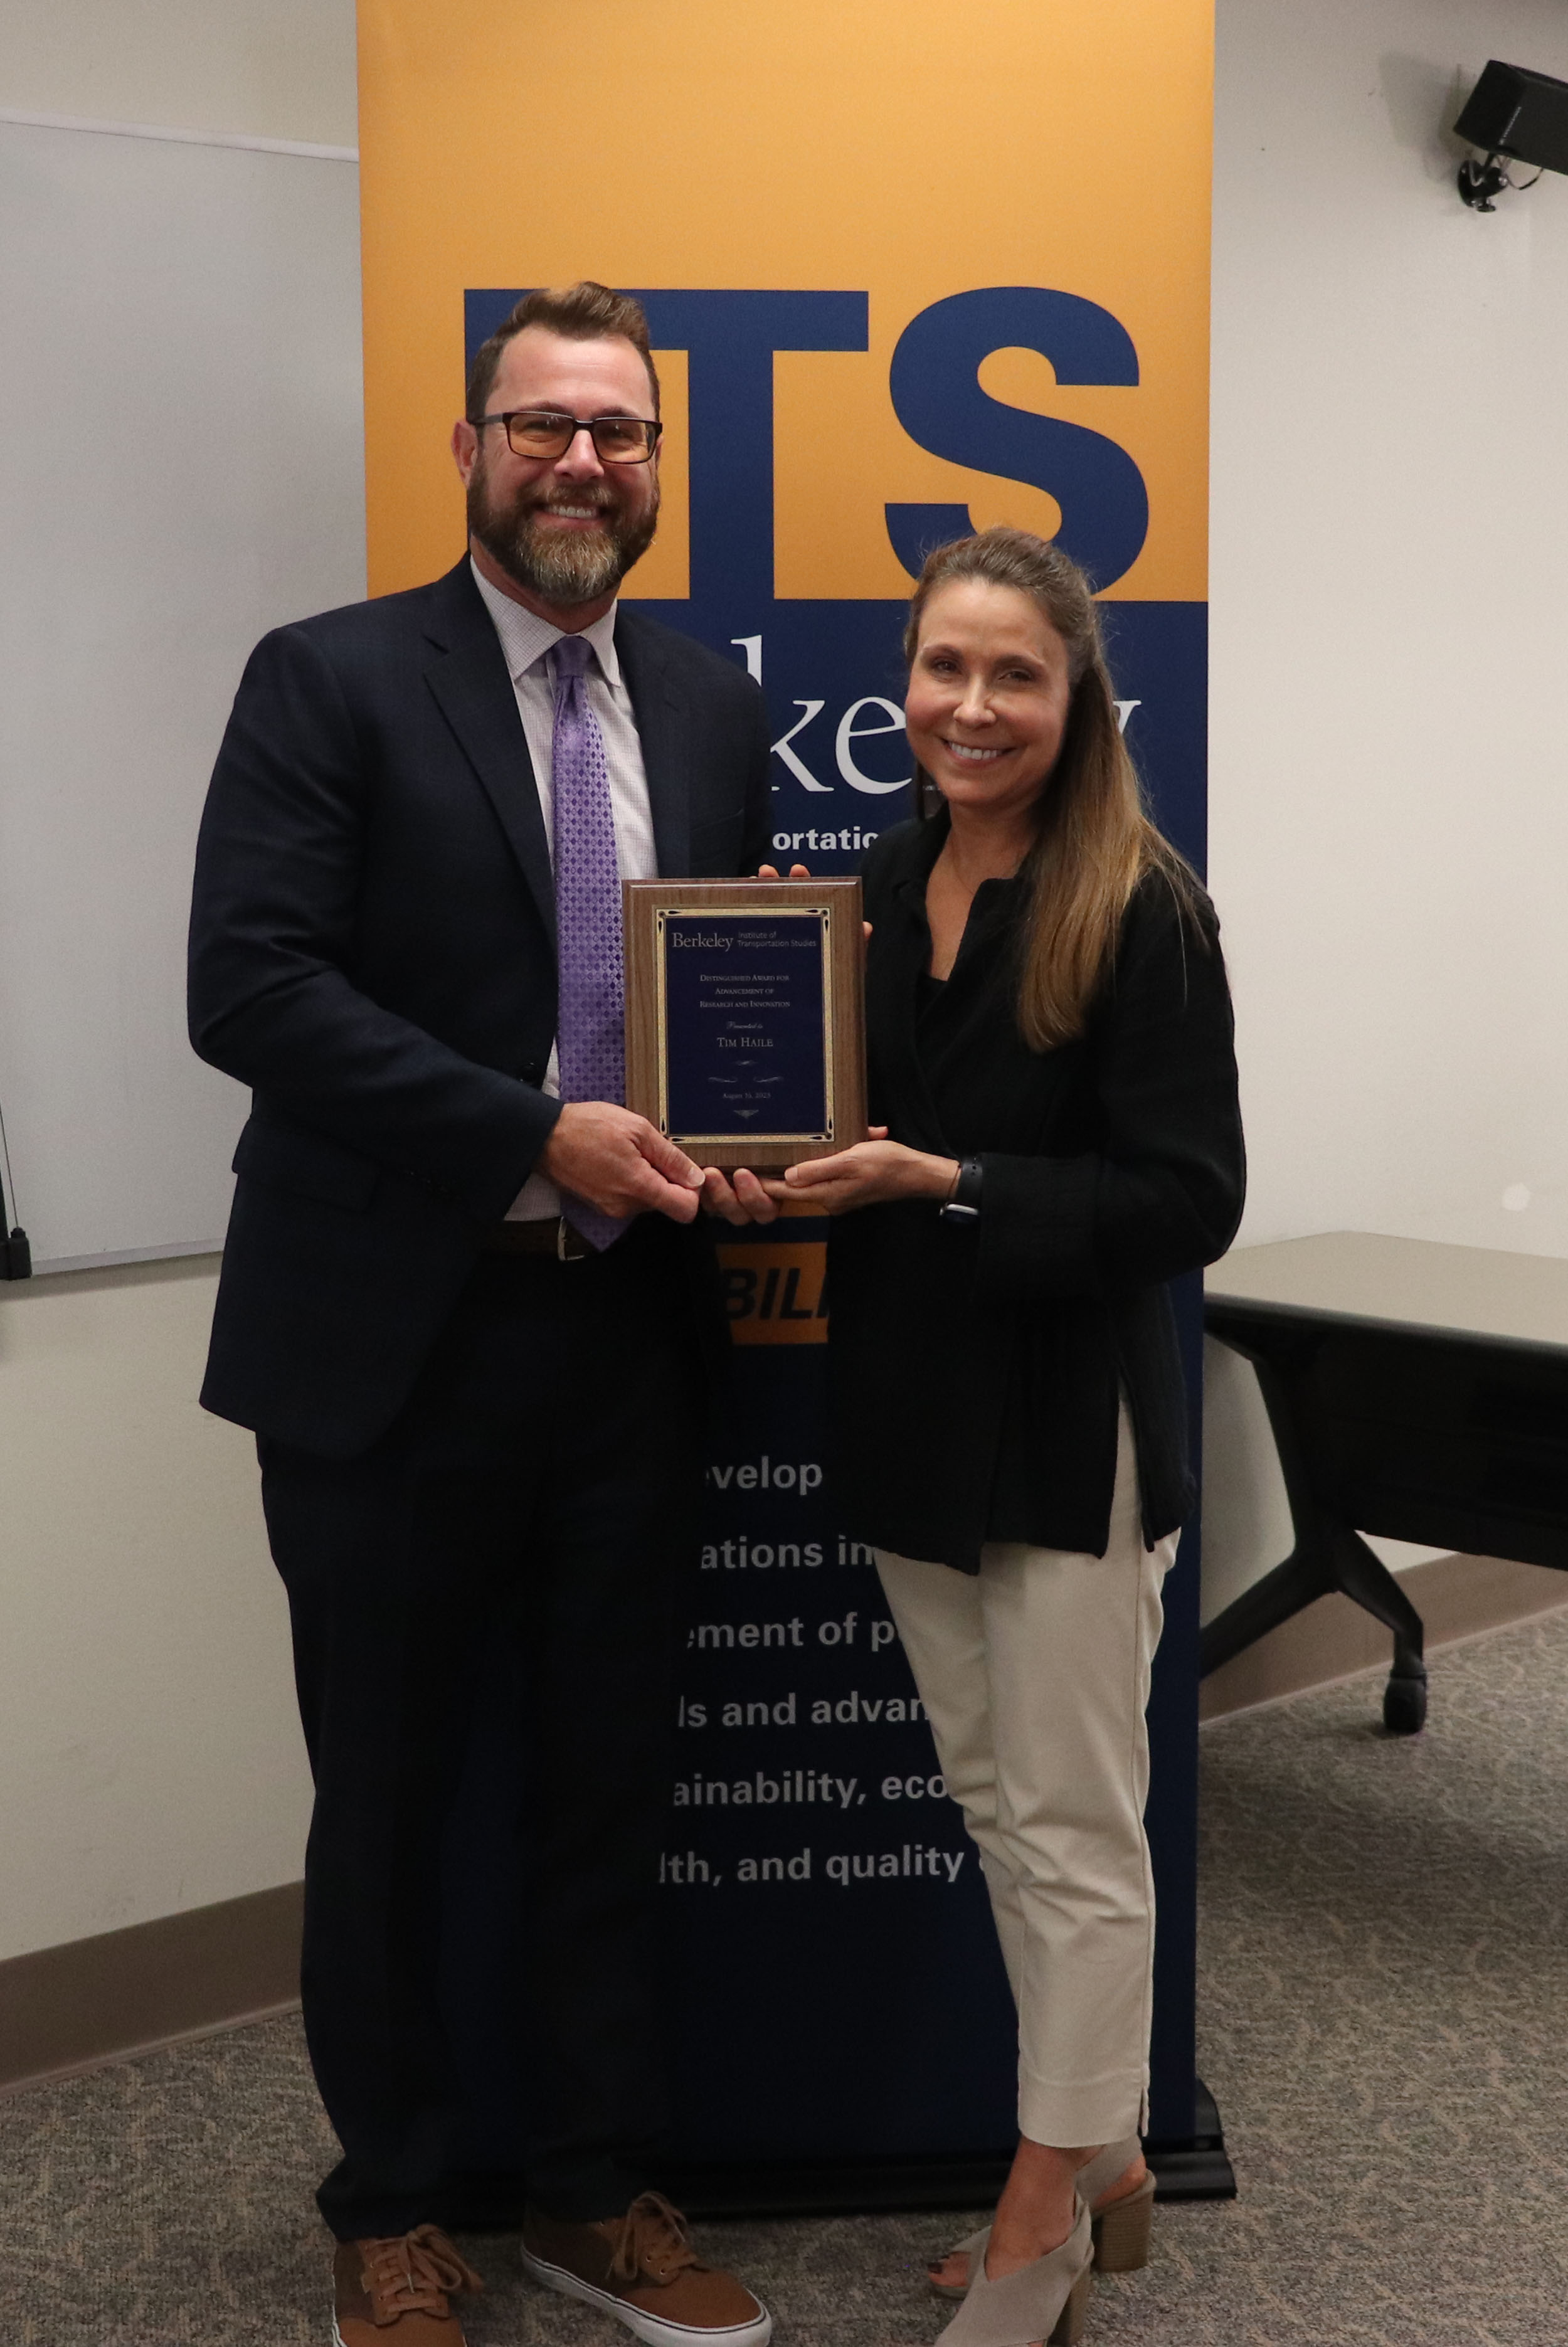 ITS Distinguished Award for Advancement of Research and Innovation: Contra Costa Transportation Authority Executive Director Tim Haile, Executive Director: For recognition of your robust and ongoing partnership with ITS Berkeley faculty and researchers on